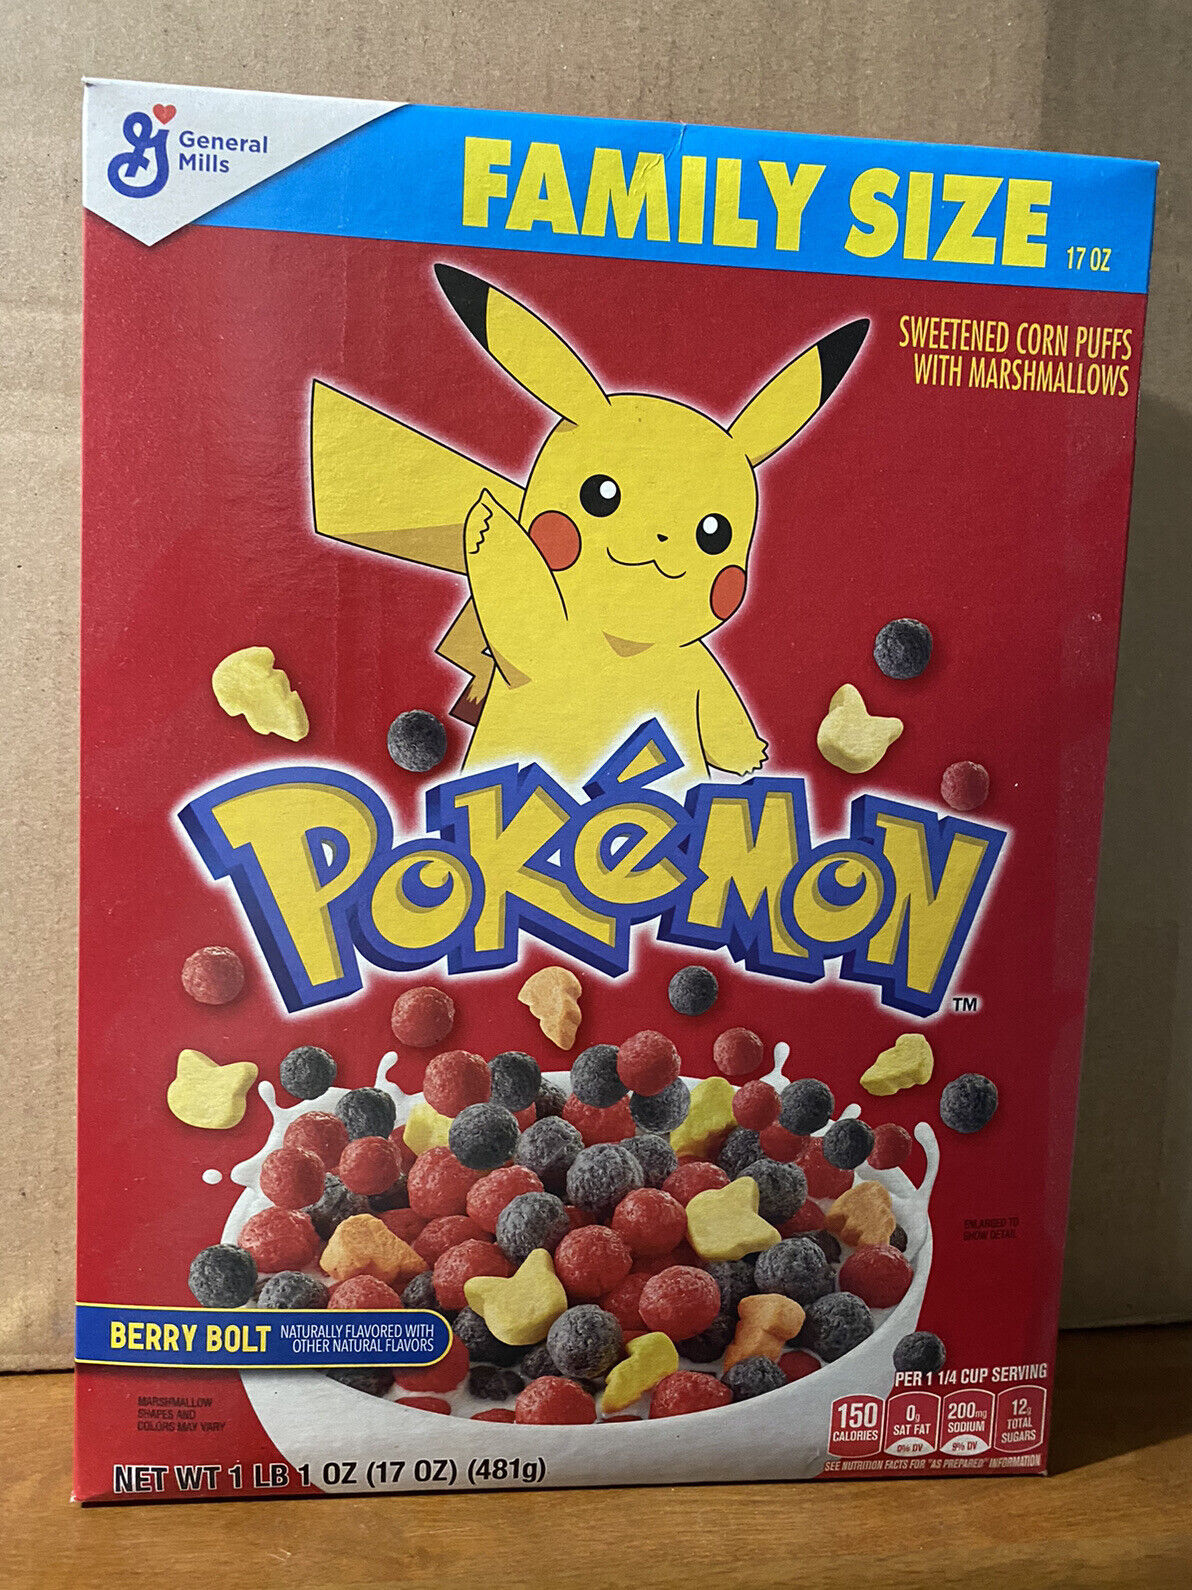 Nintendo Pokemon Exclusive Cereal General Mills Berry Bolt Limited - Family Size